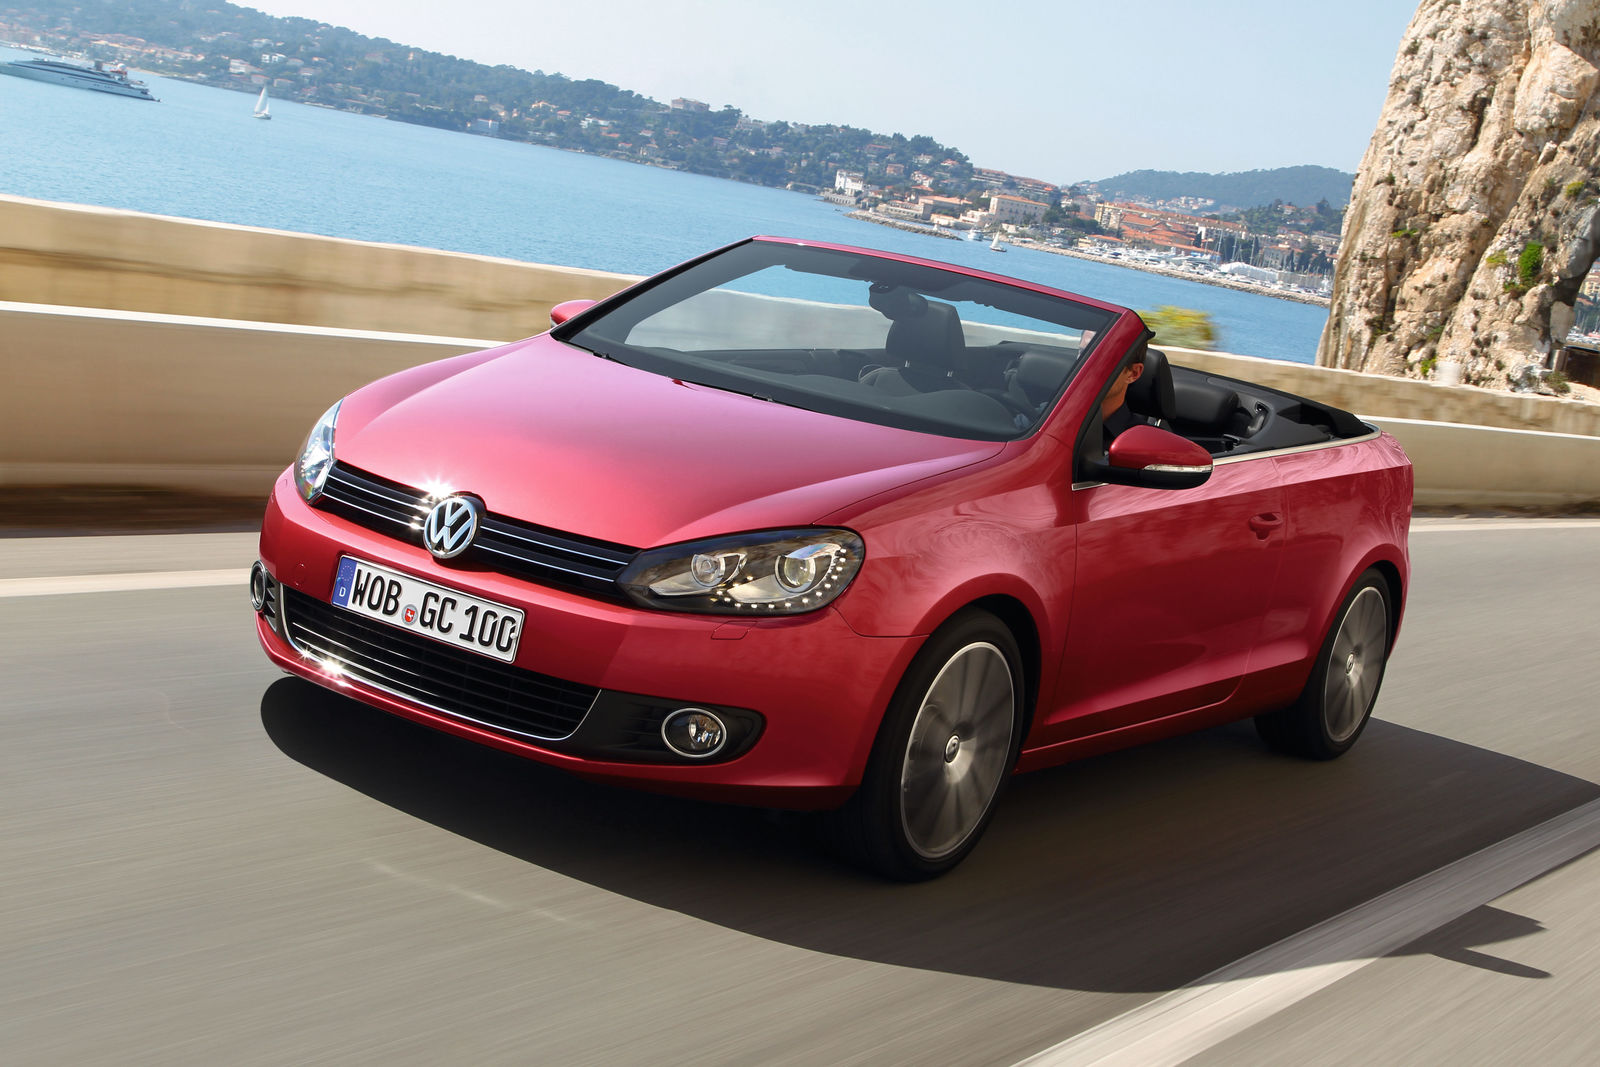 The new Golf Cabriolet